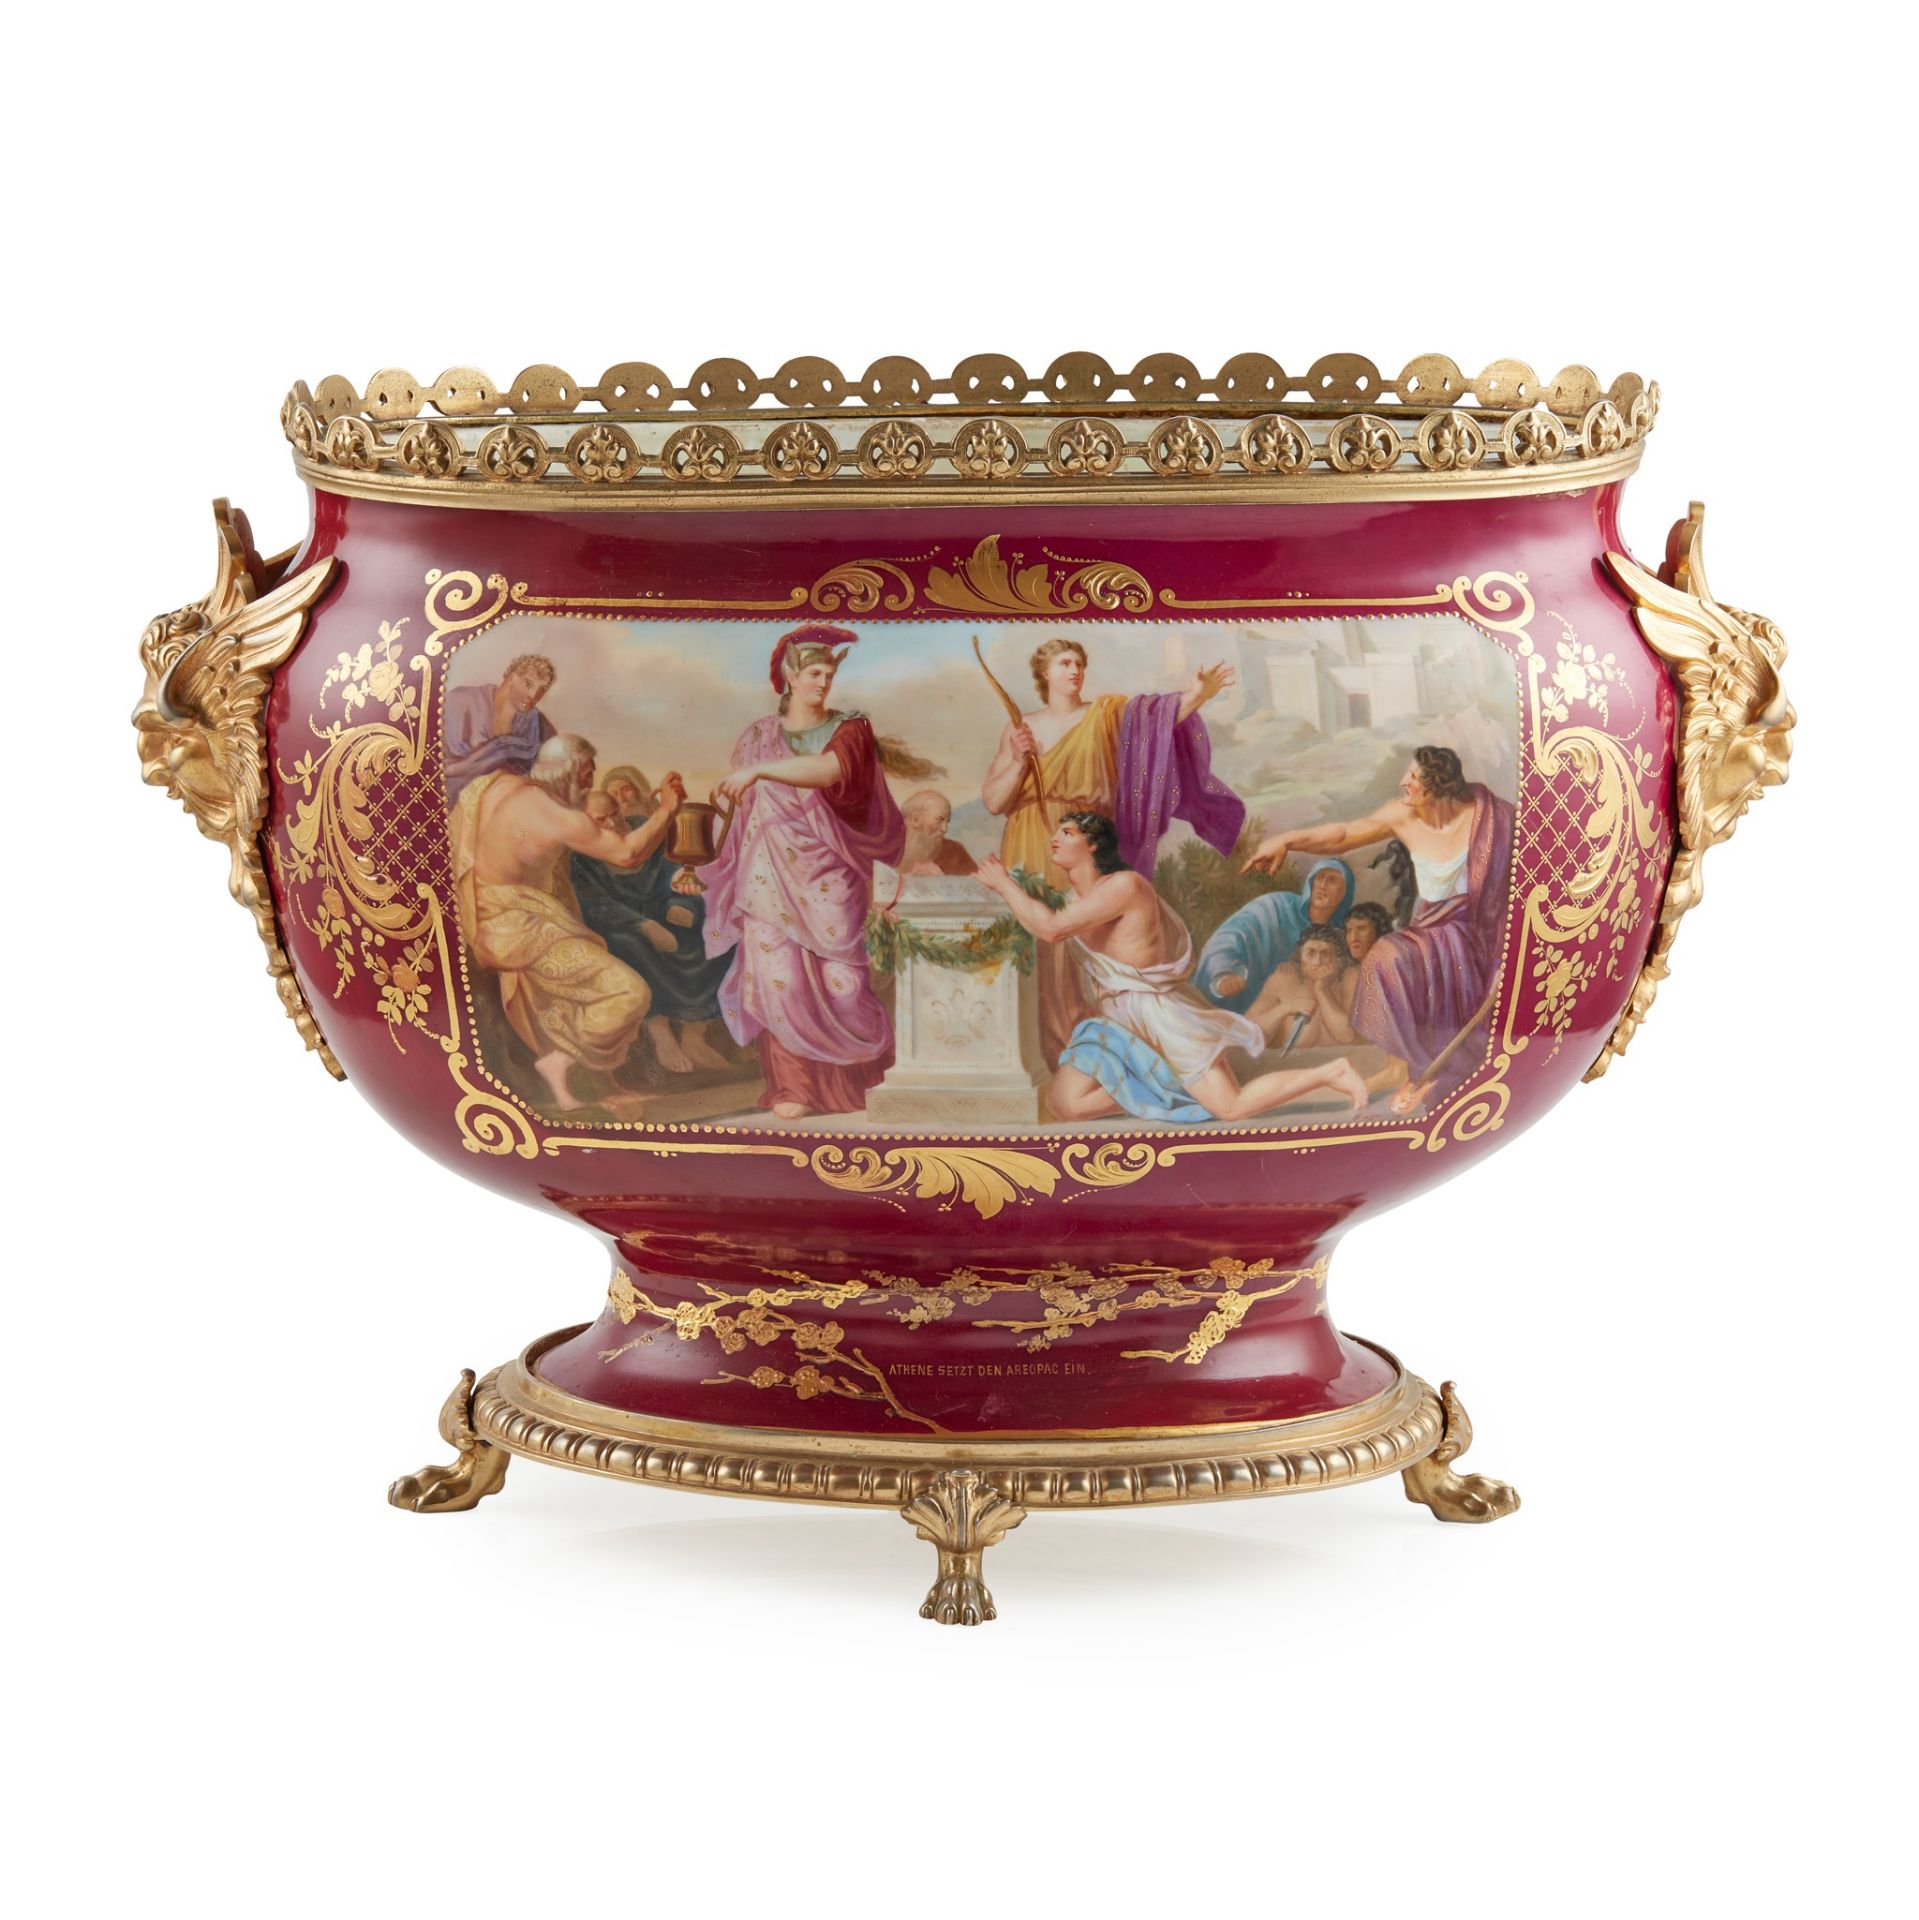 LARGE VIENNA STYLE PORCELAIN CENTERPIECE LATE 19TH/ EARLY 20TH CENTURY